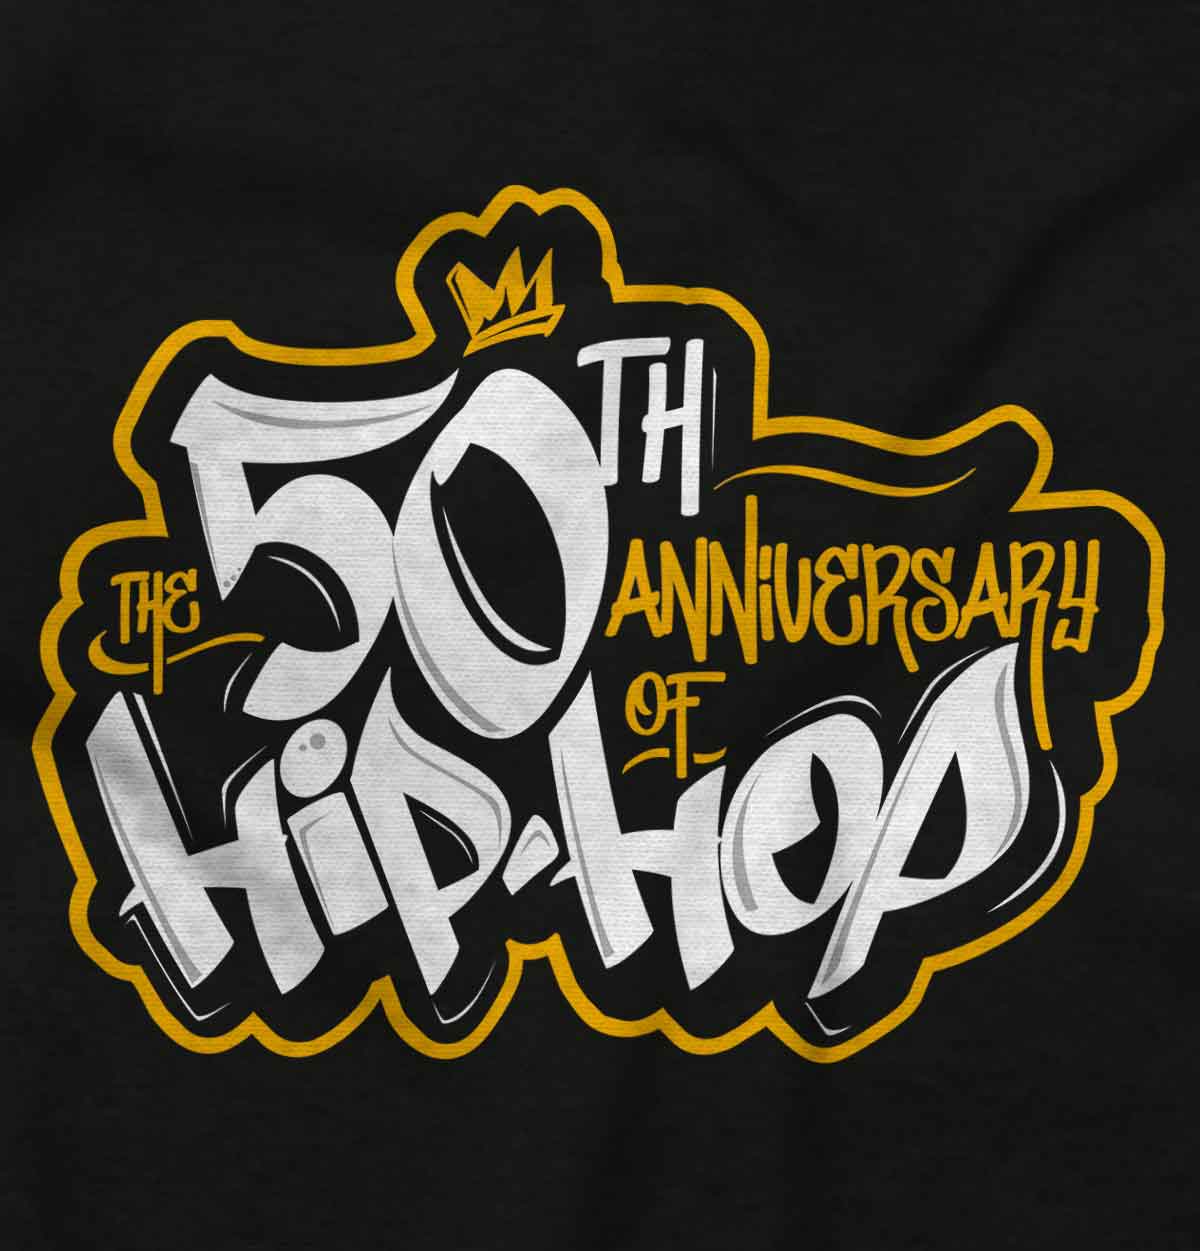 A high definition logo of the brand "The 50th Anniversary of Hip-Hop".